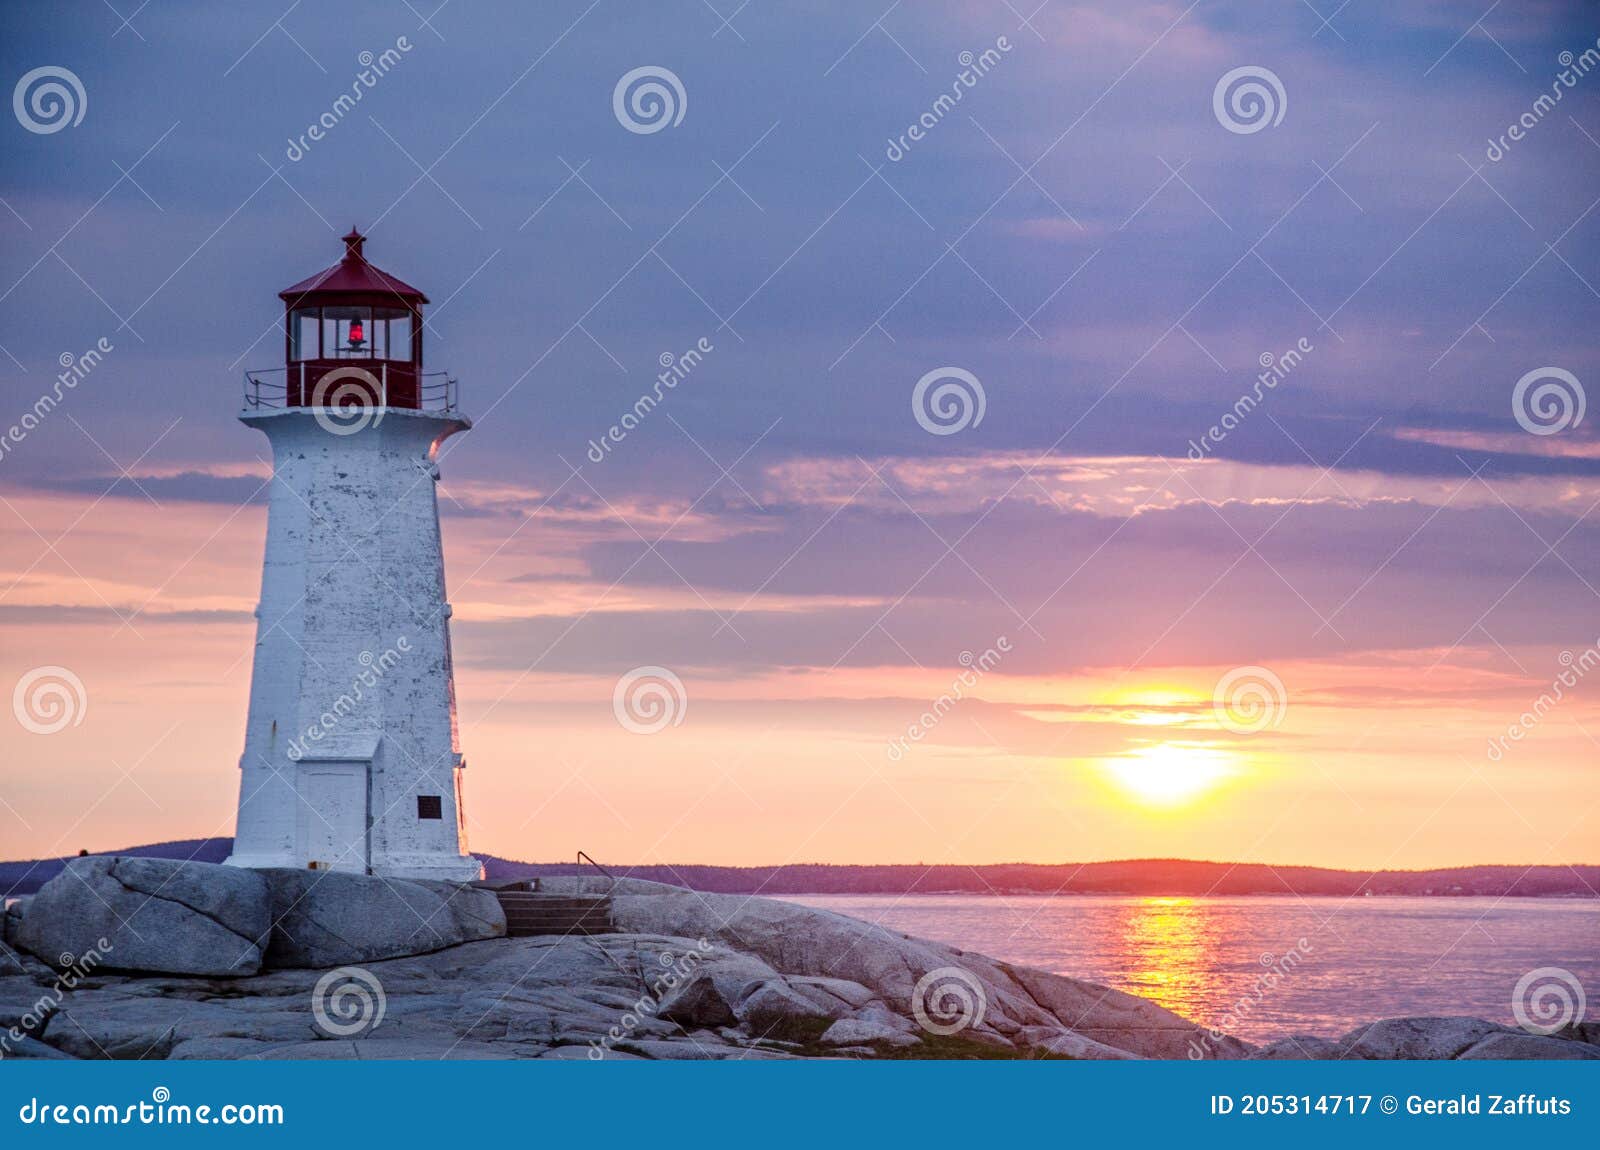 peggy`s cove lighthouse at sunset with storm clouds